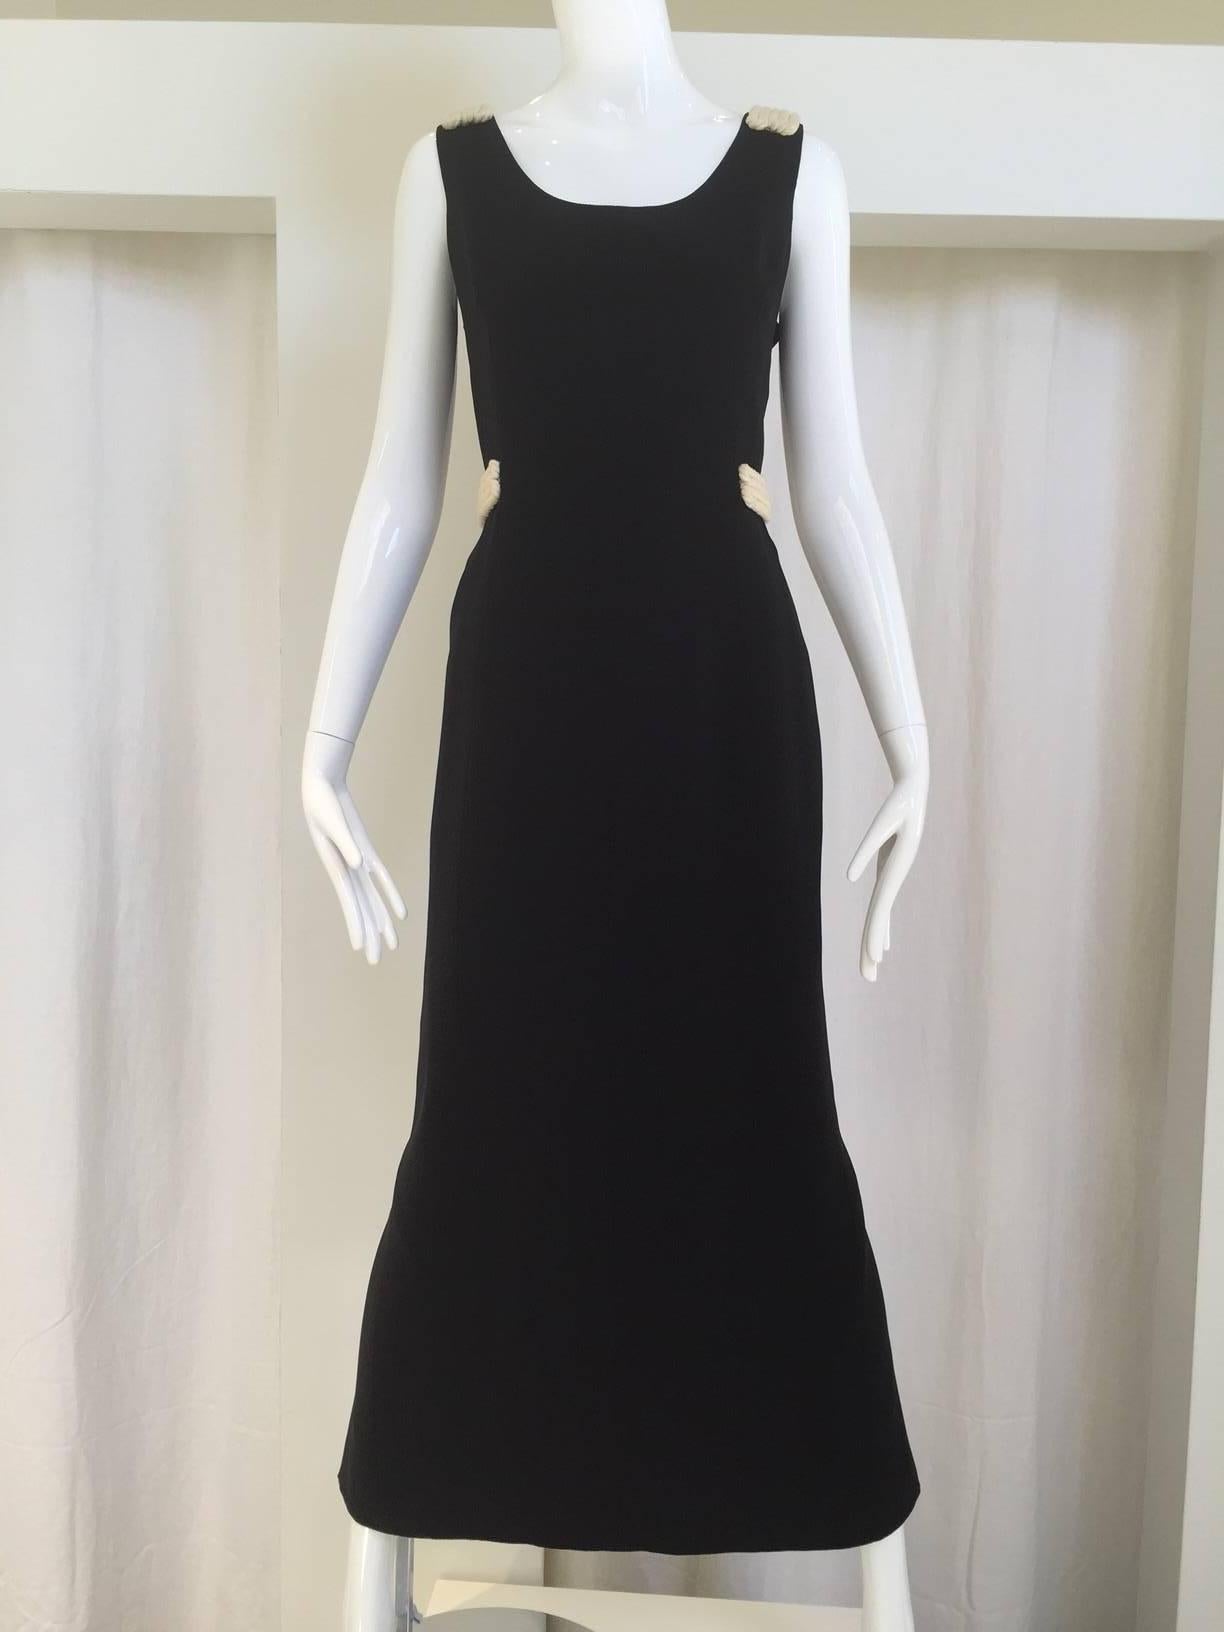 90s Gianfranco Ferre black silk dress with rope attached to waist and strap. This dress marked 44 but it is fit modern 4
Bust: 34